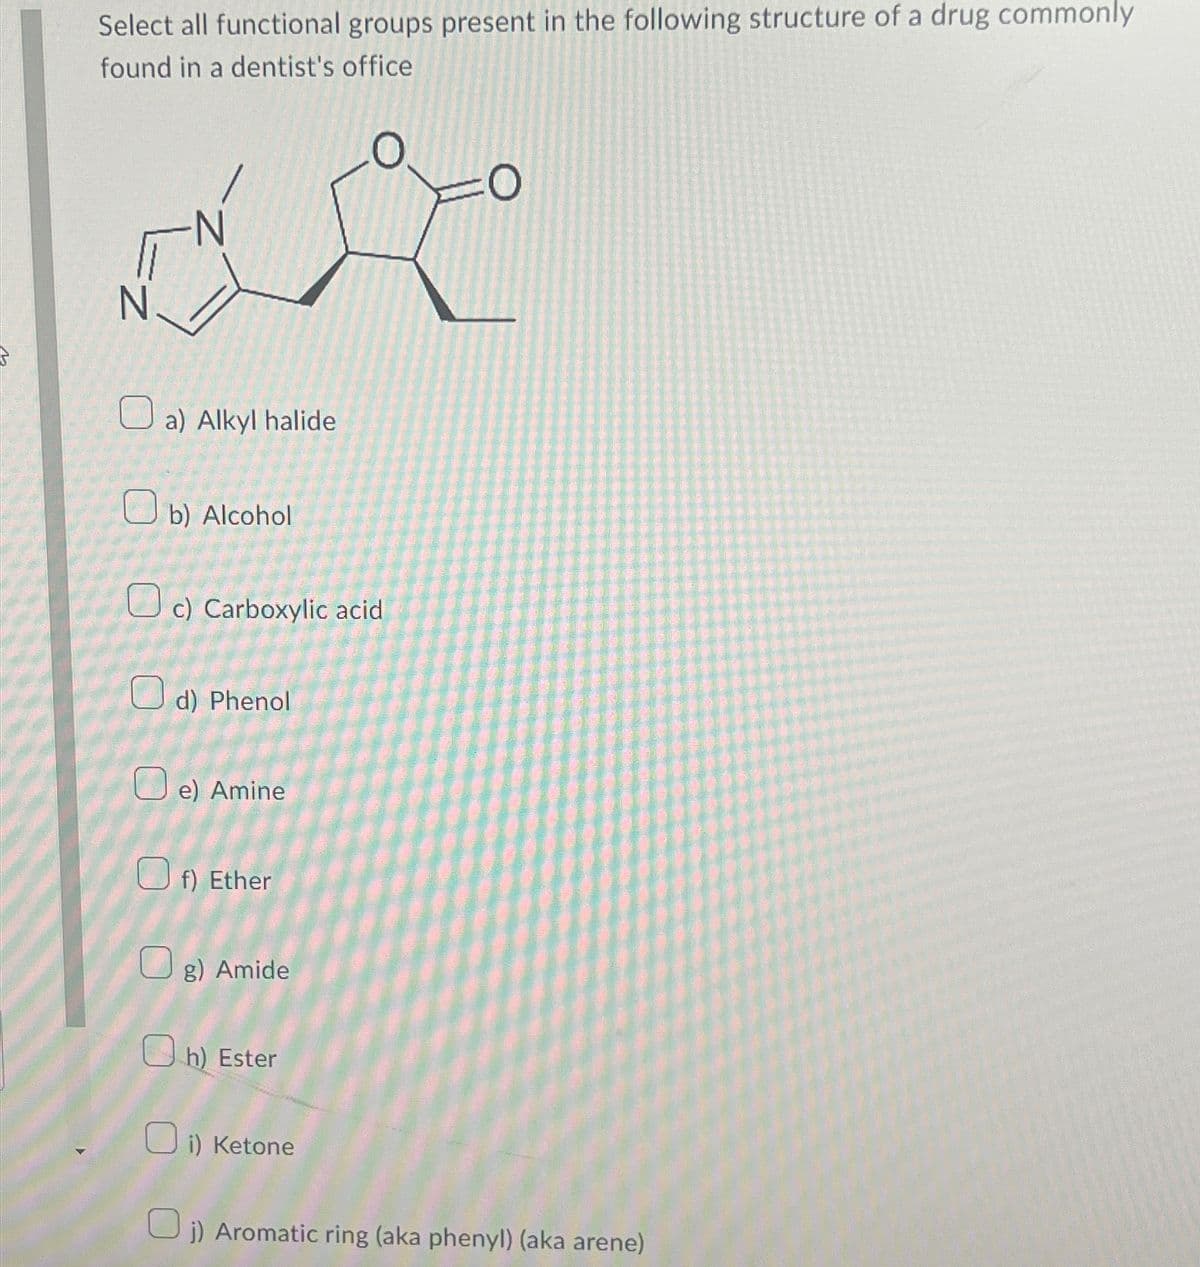 Select all functional groups present in the following structure of a drug commonly
found in a dentist's office
N
a) Alkyl halide
b) Alcohol
c) Carboxylic acid
d) Phenol
e) Amine
f) Ether
Og) Amide
h) Ester
i) Ketone
0
j) Aromatic ring (aka phenyl) (aka arene)